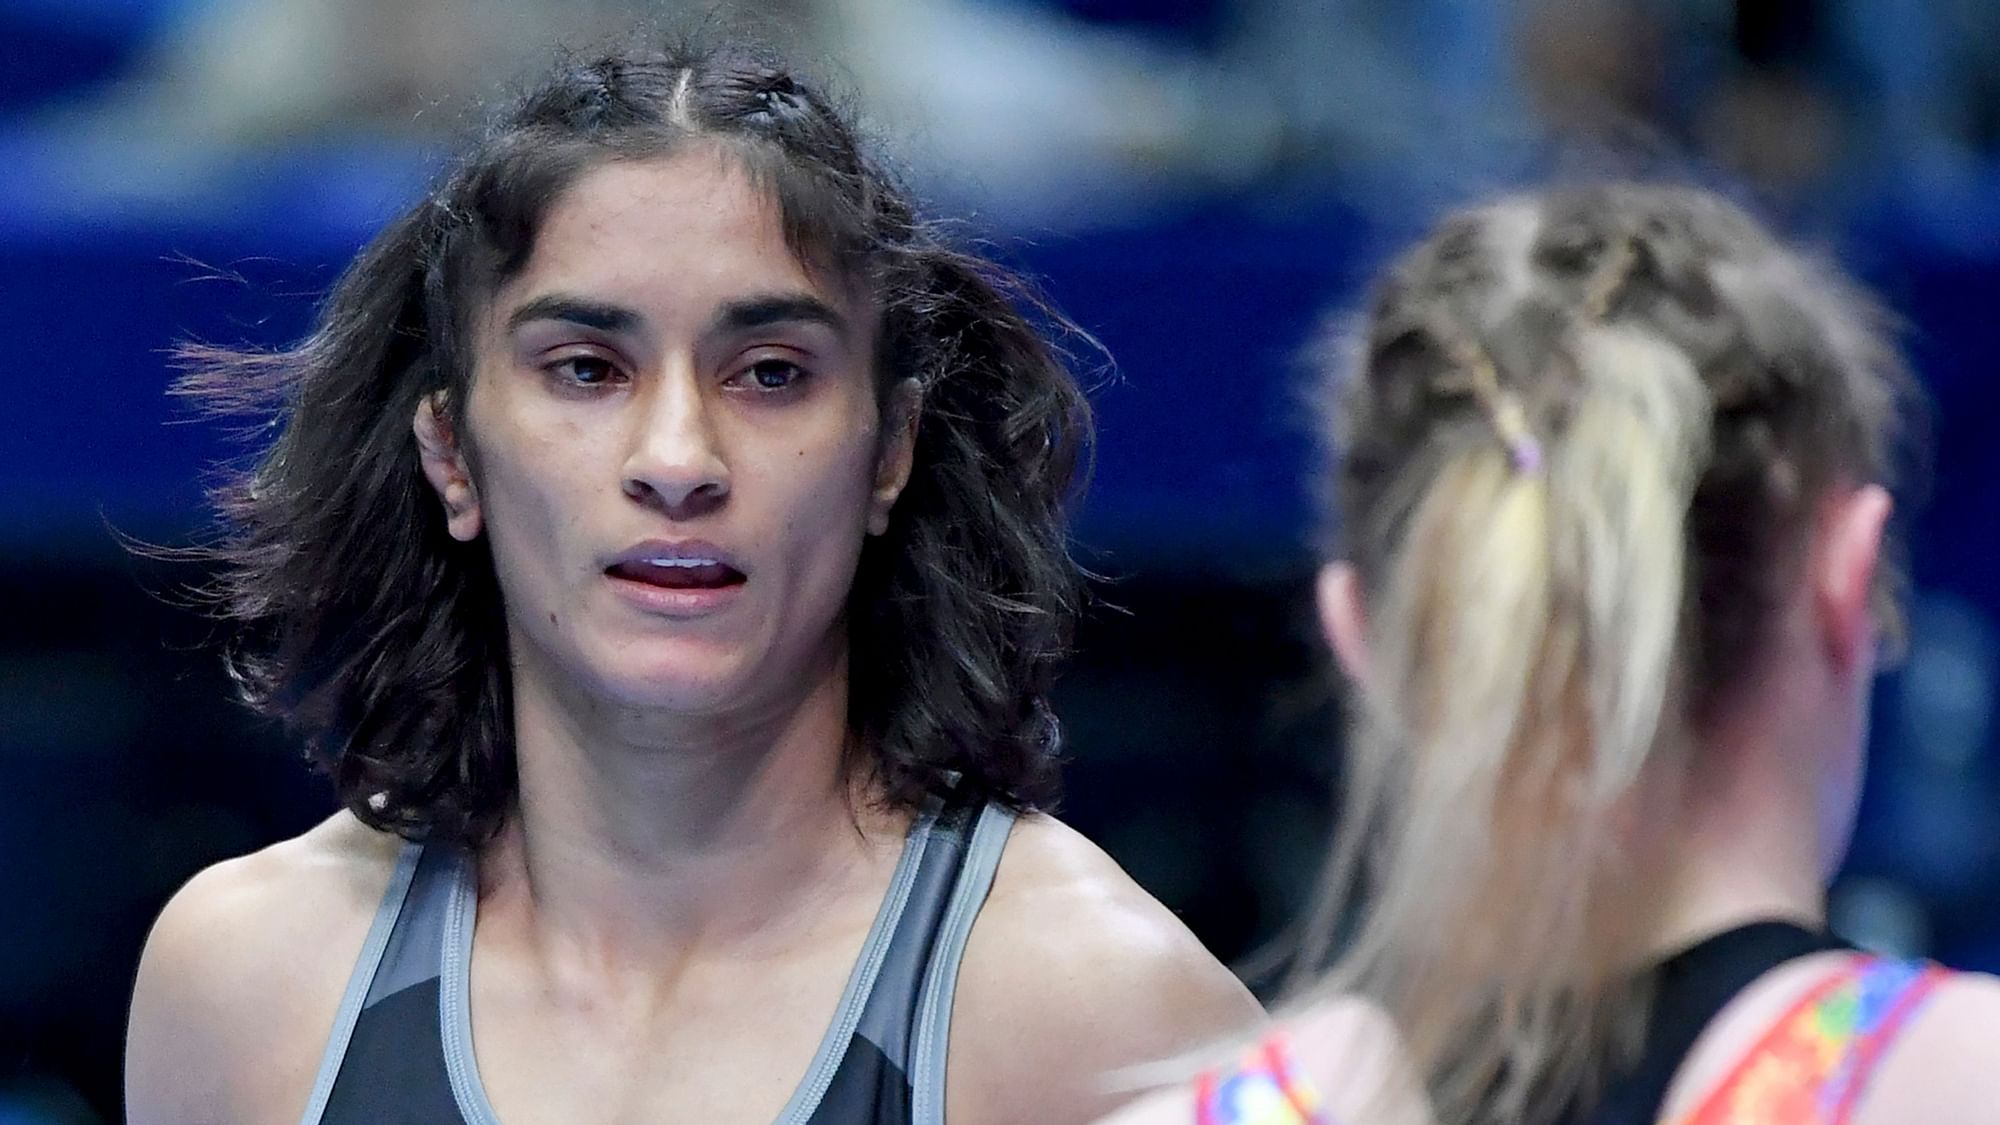 Vinesh Phogat has pulled out of the wrestling national camp due to COVID-19.